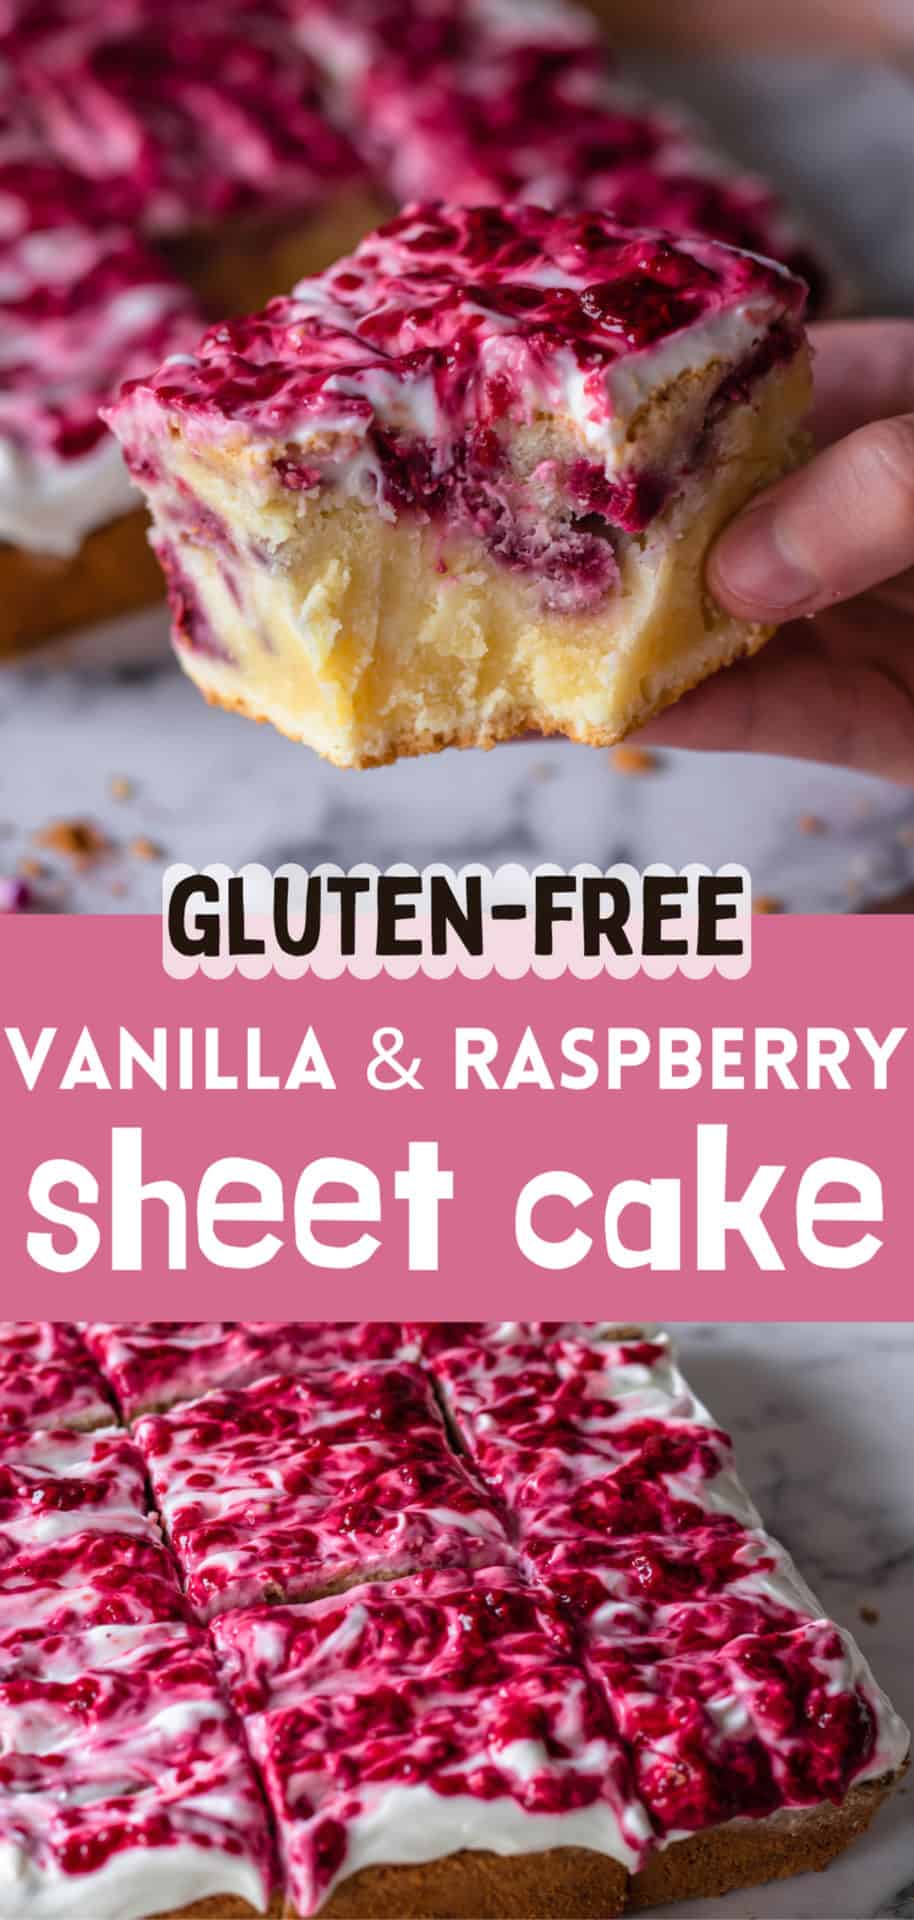 This Gluten-Free Vanilla & Raspberry Sheet Cake is easy to make, indulging, fruity, tender, and so delicious